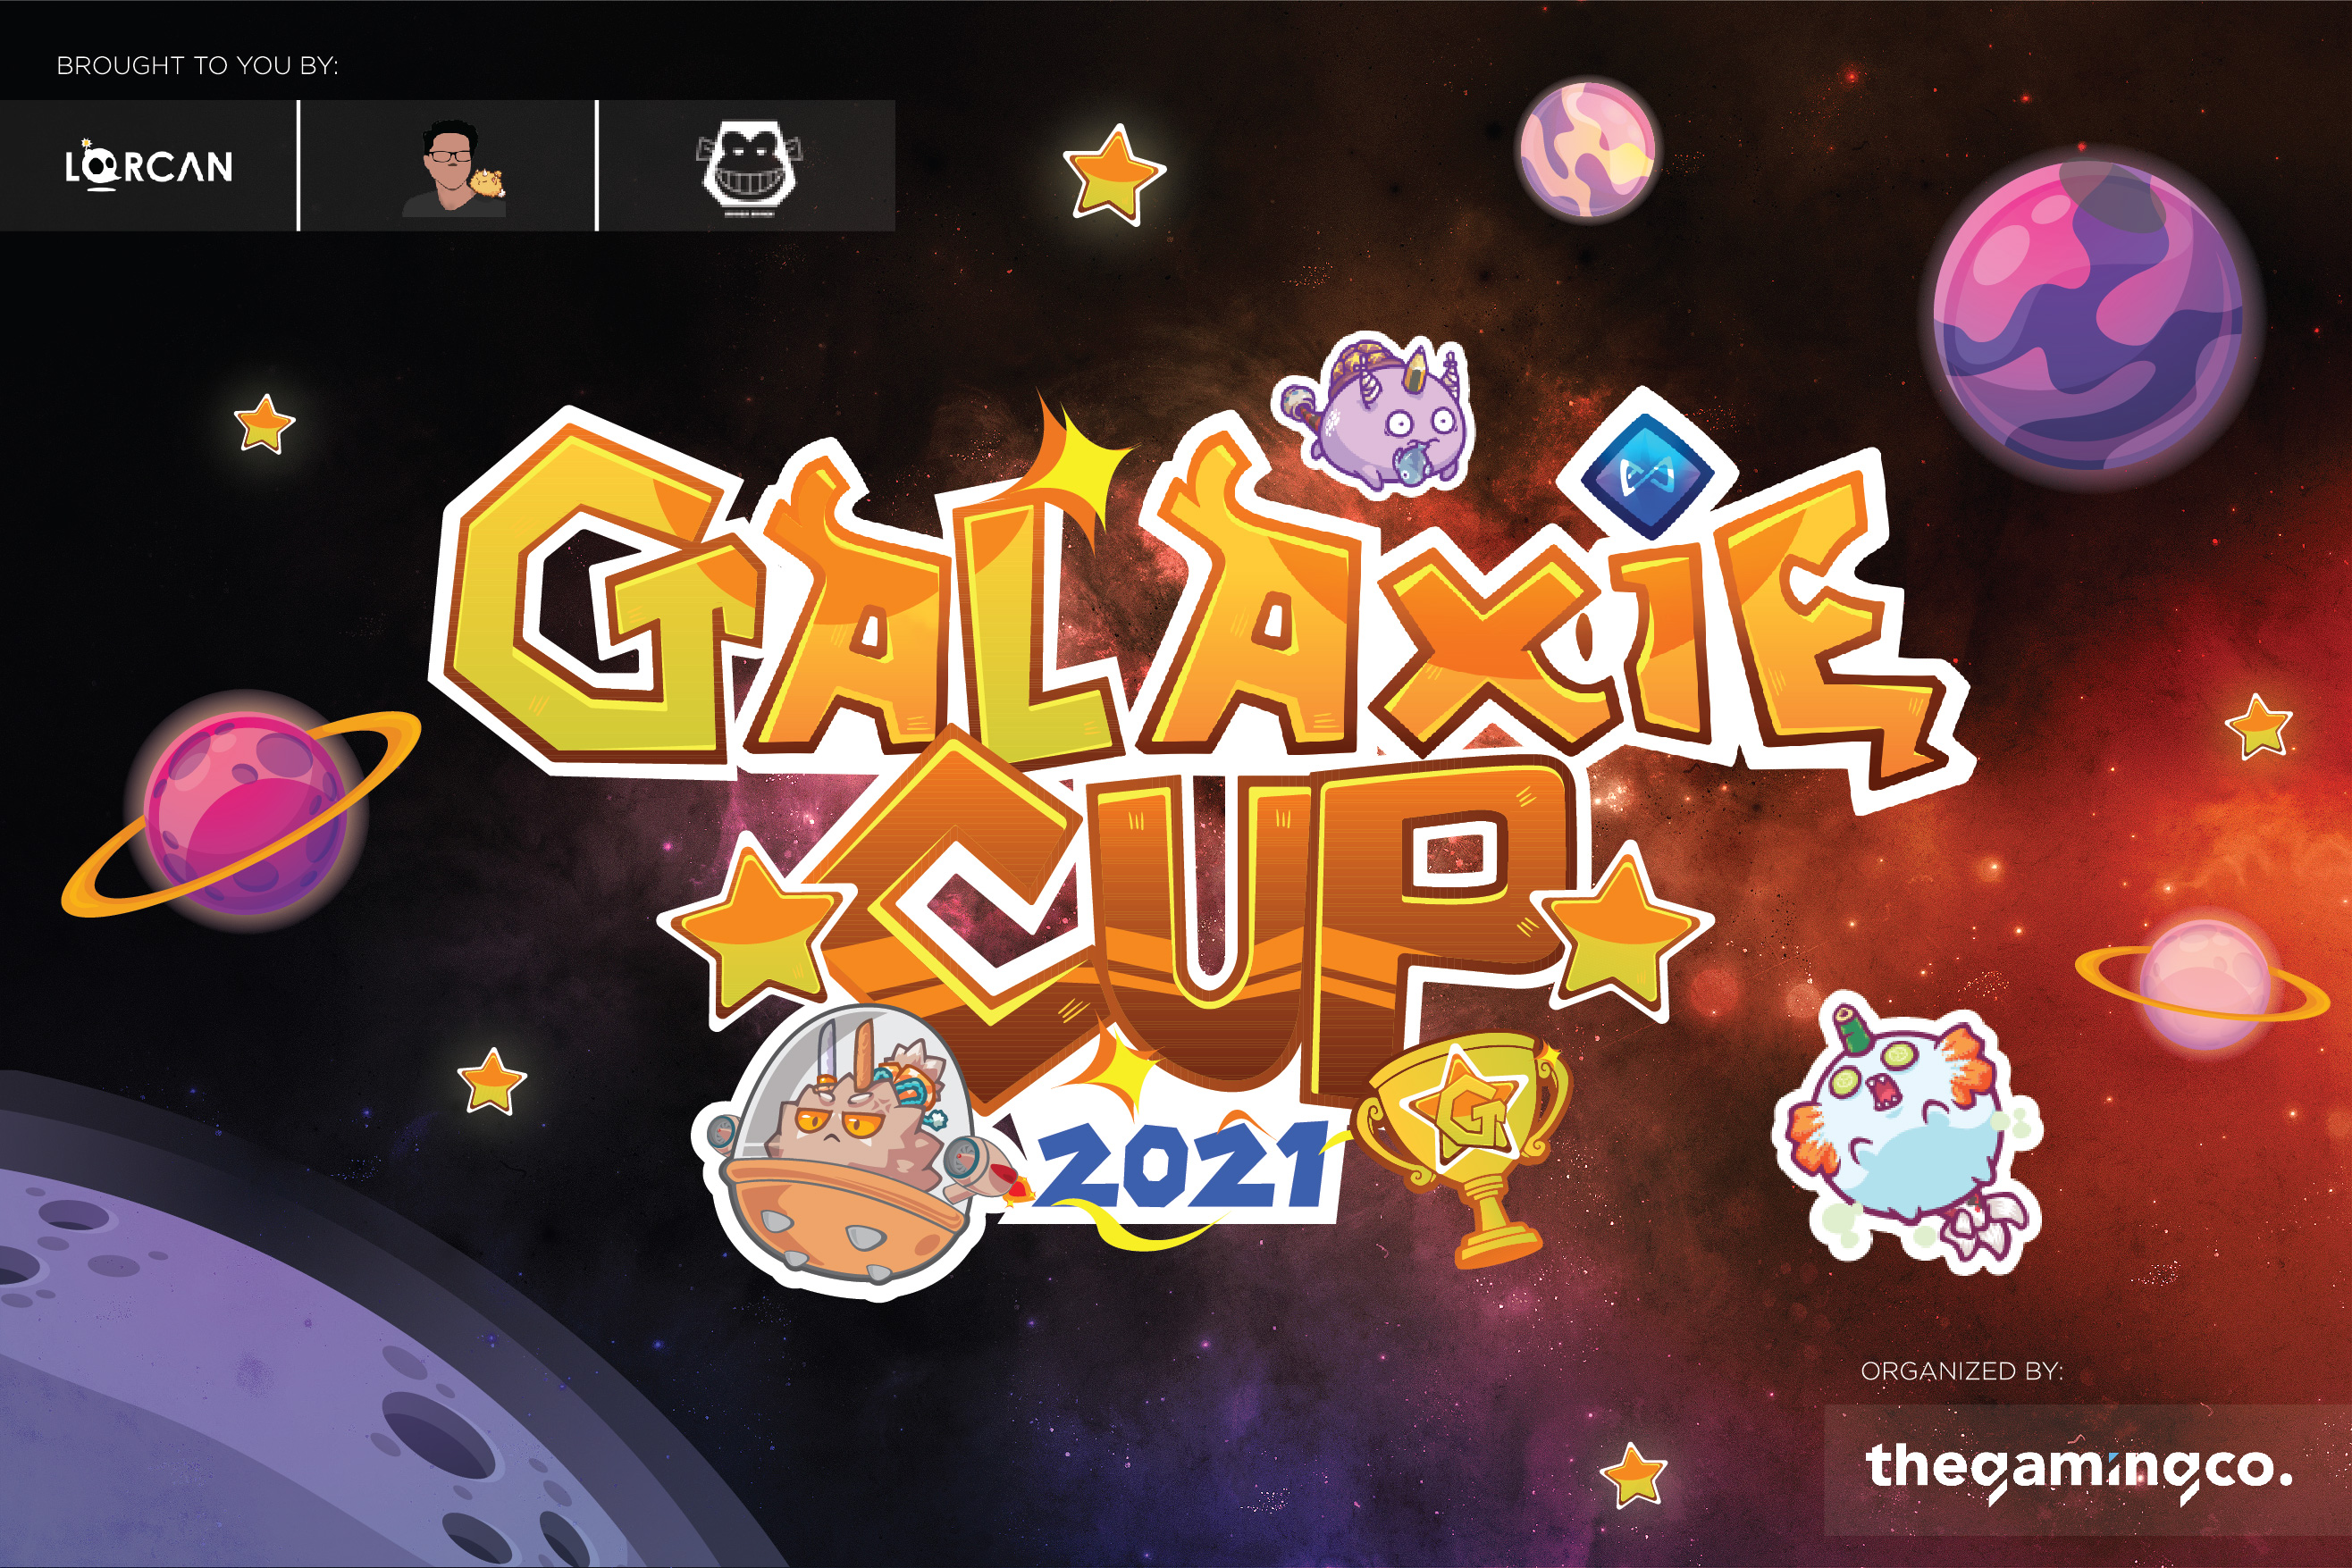 FTX GalAxie Cup - The Gaming Company